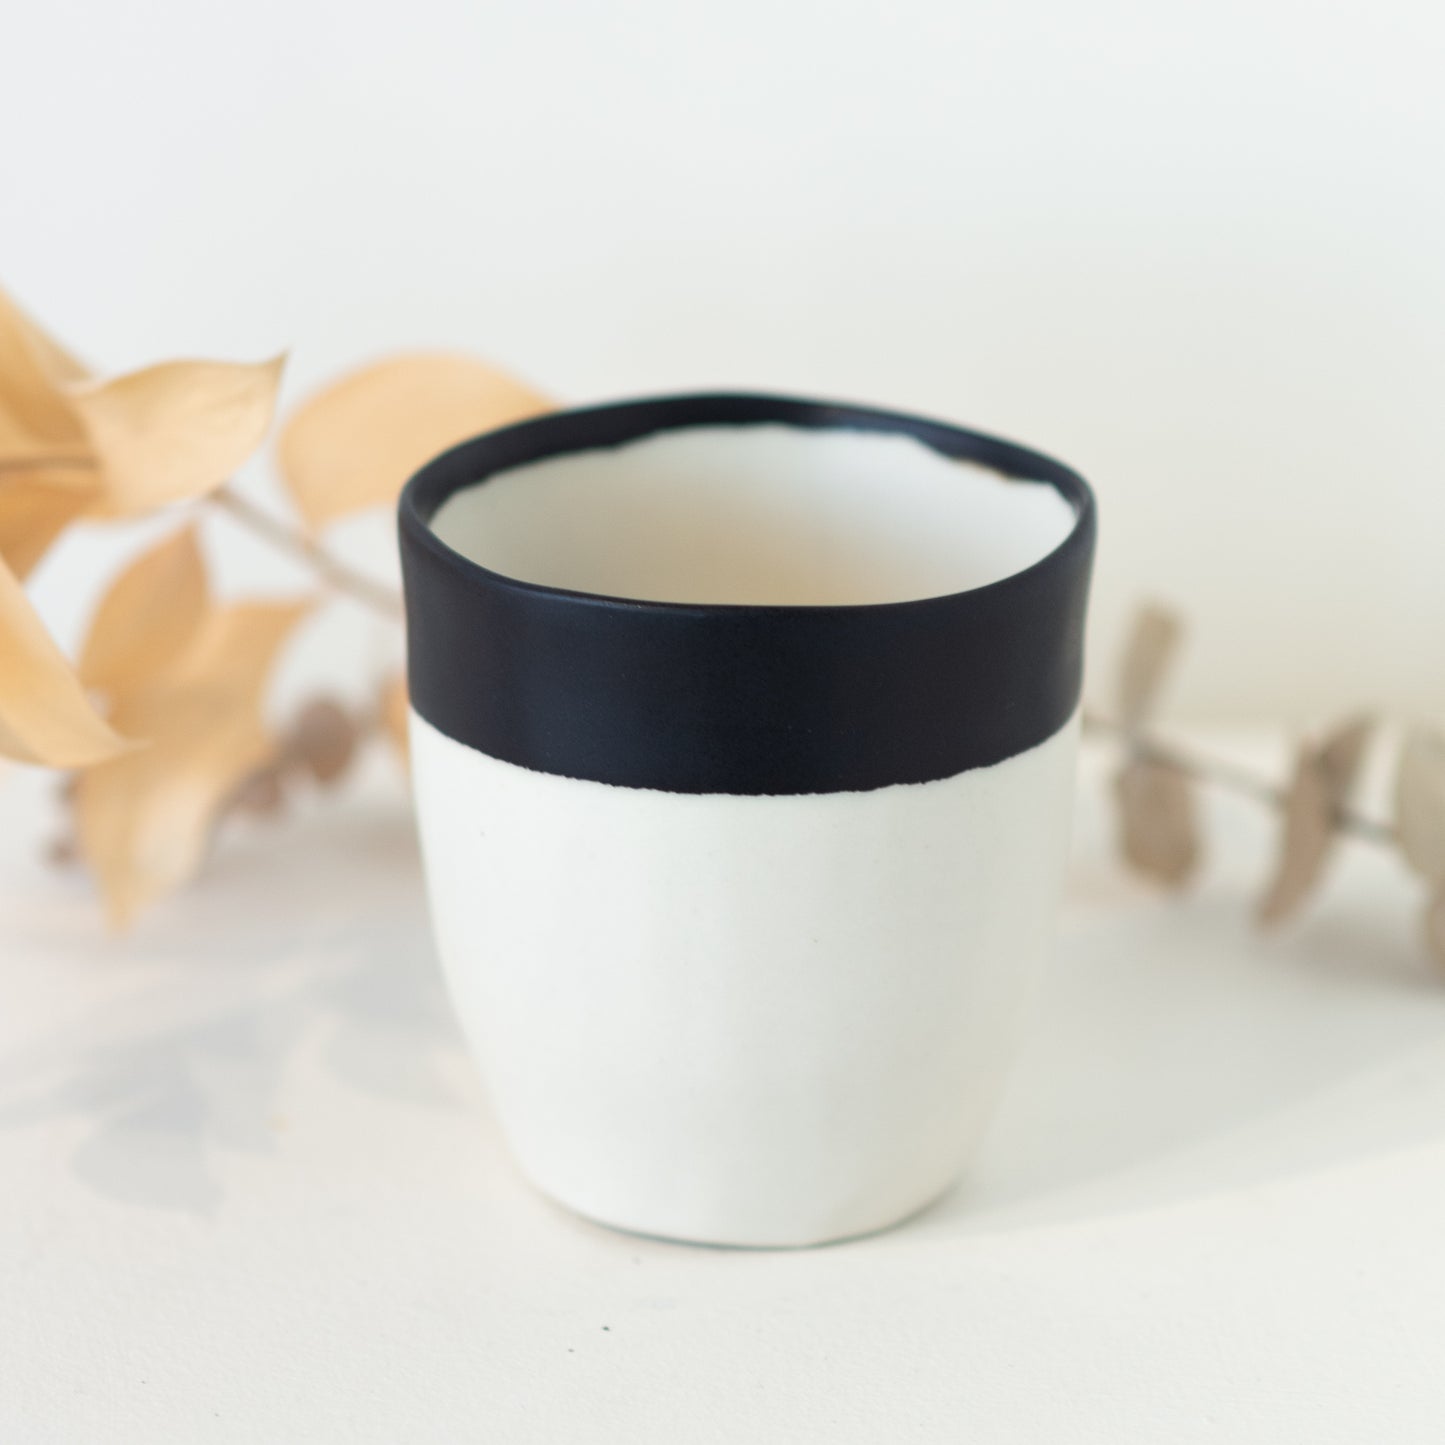 White cup with black dip at top of cup.